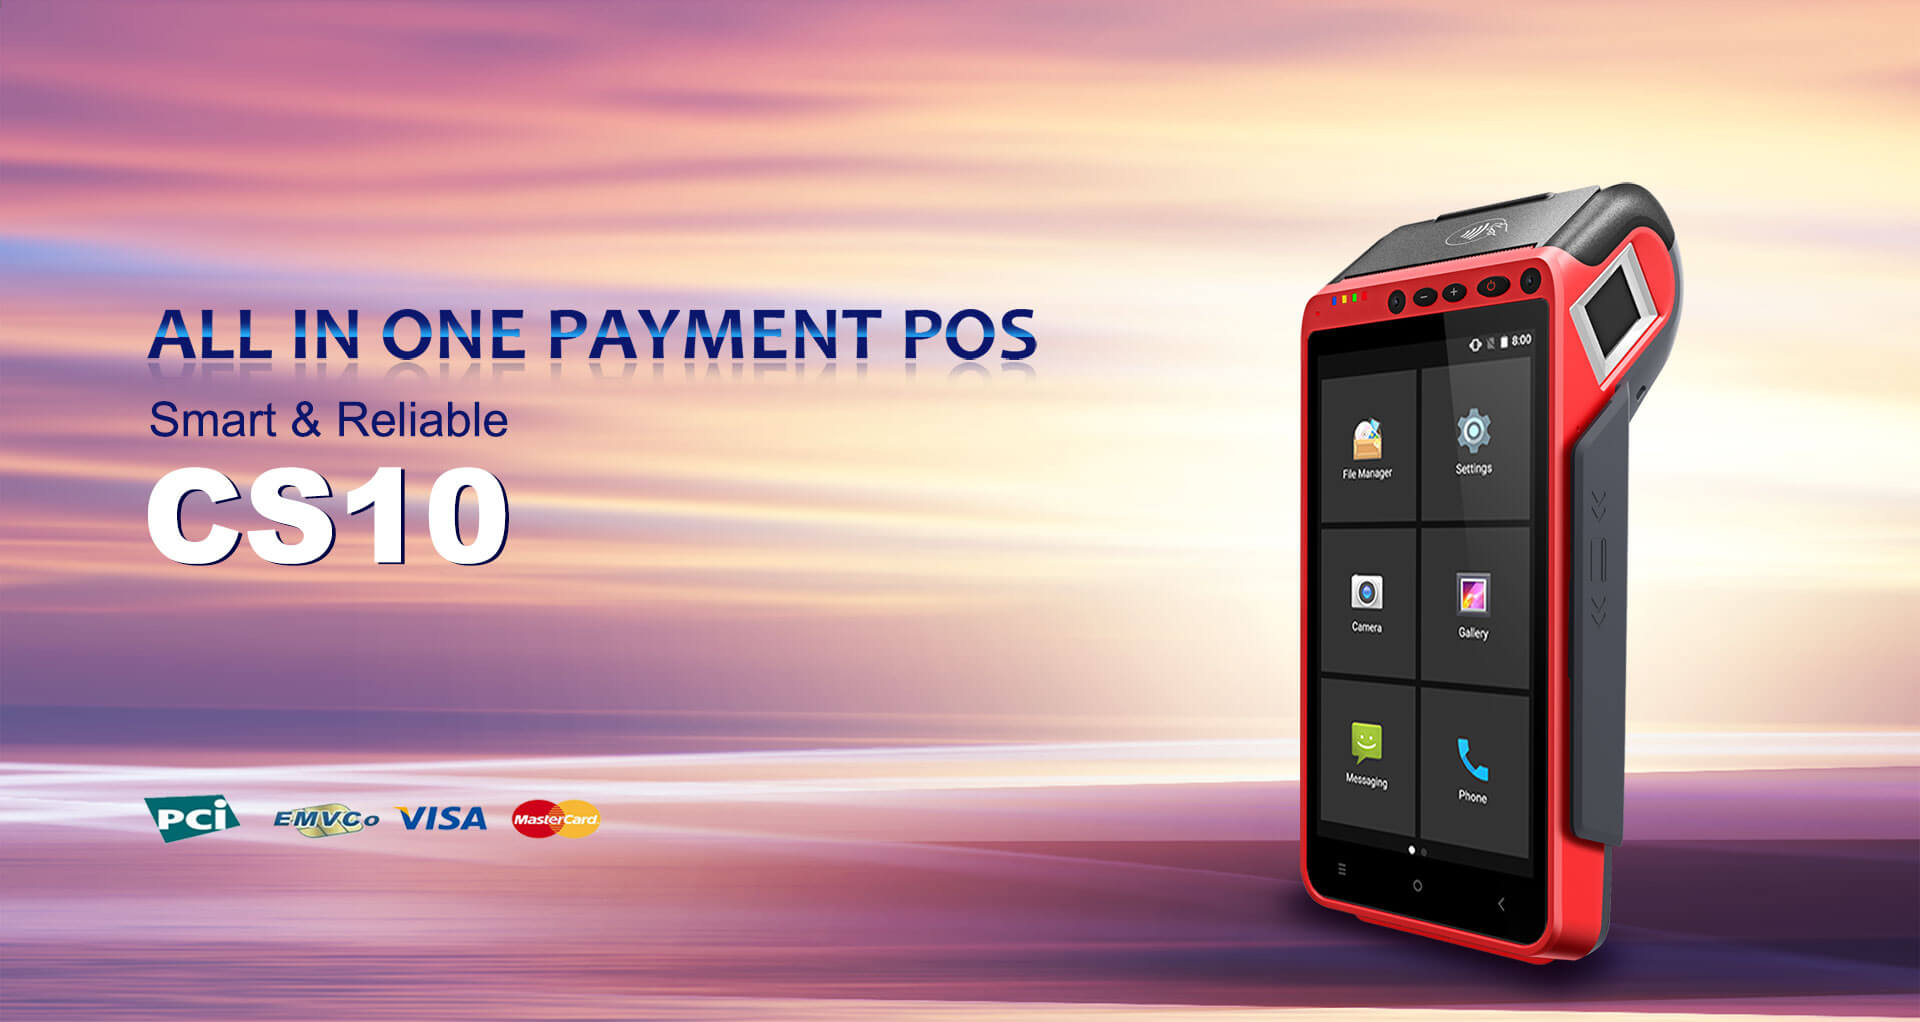 ALL IN ONE PAYMENT POS